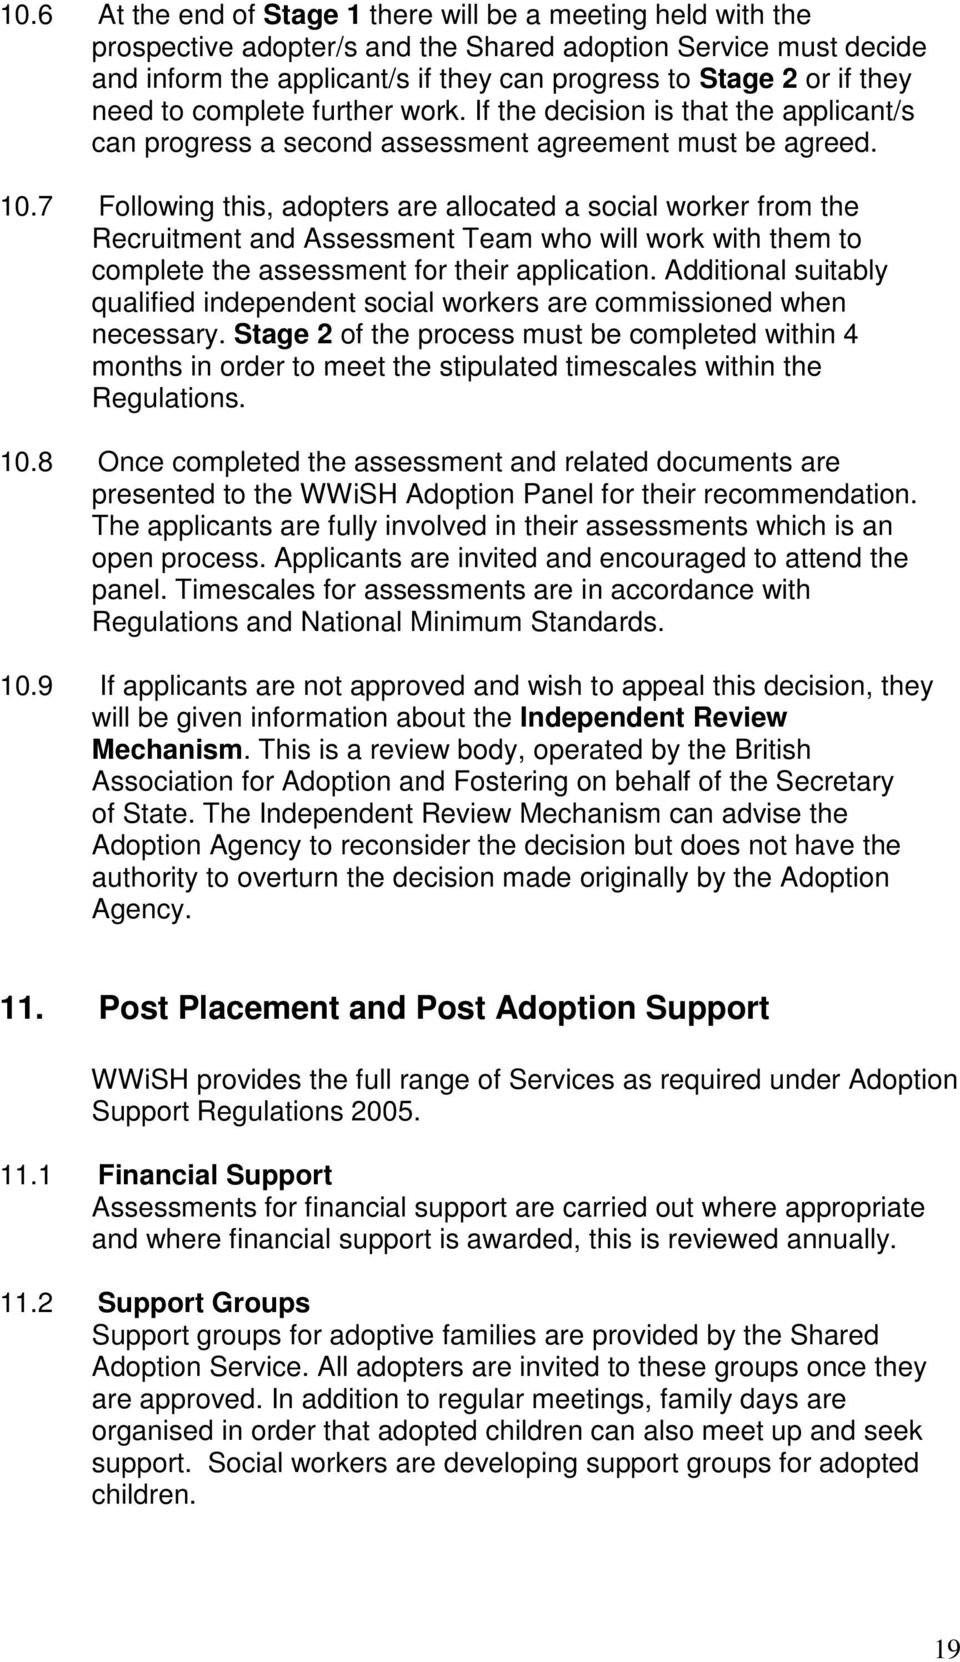 7 Following this, adopters are allocated a social worker from the Recruitment and Assessment Team who will work with them to complete the assessment for their application.